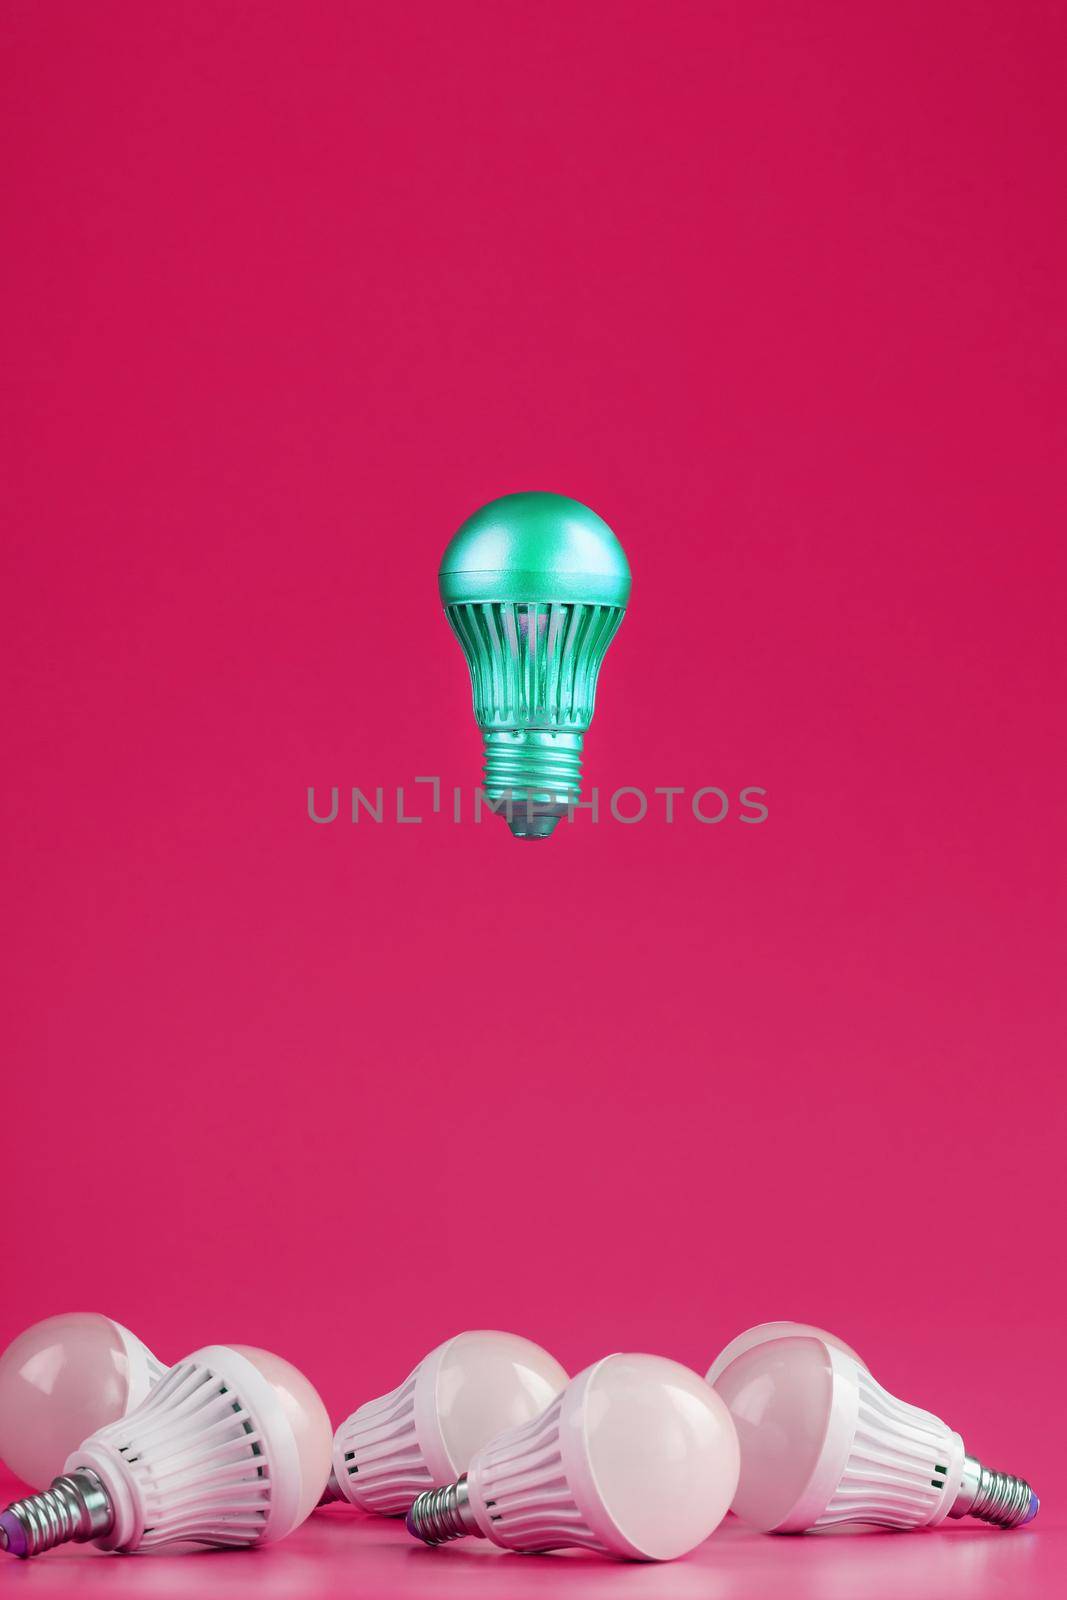 A special Light bulb hovers over simple, standard white light bulbs on a pink background. Minimalistic style with conceptual ideas. Be different